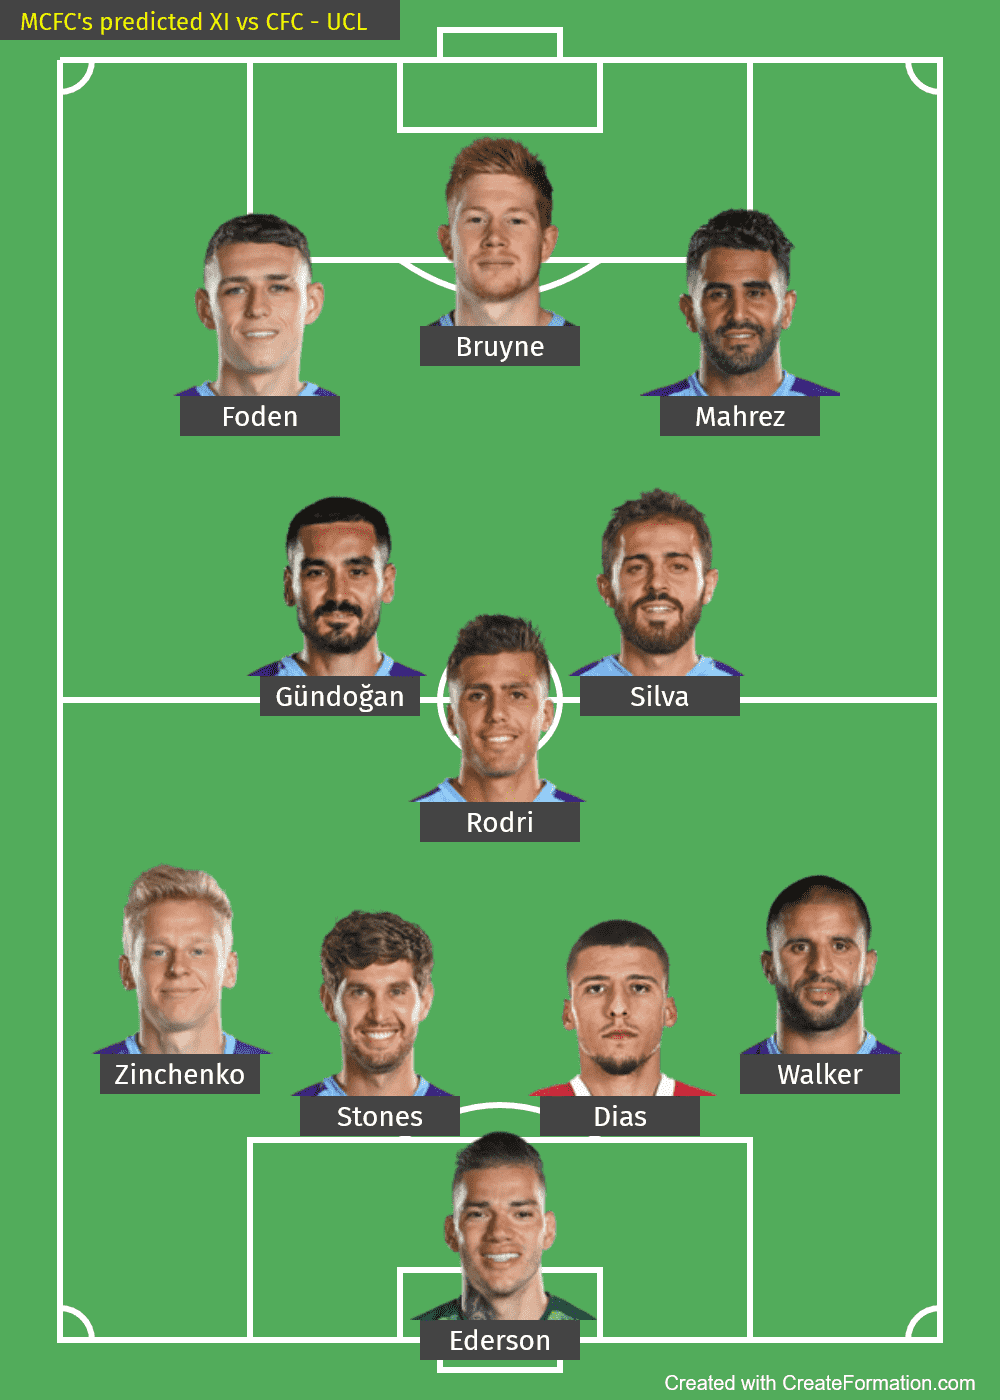 Manchester City predicted XI vs CFC - UCL